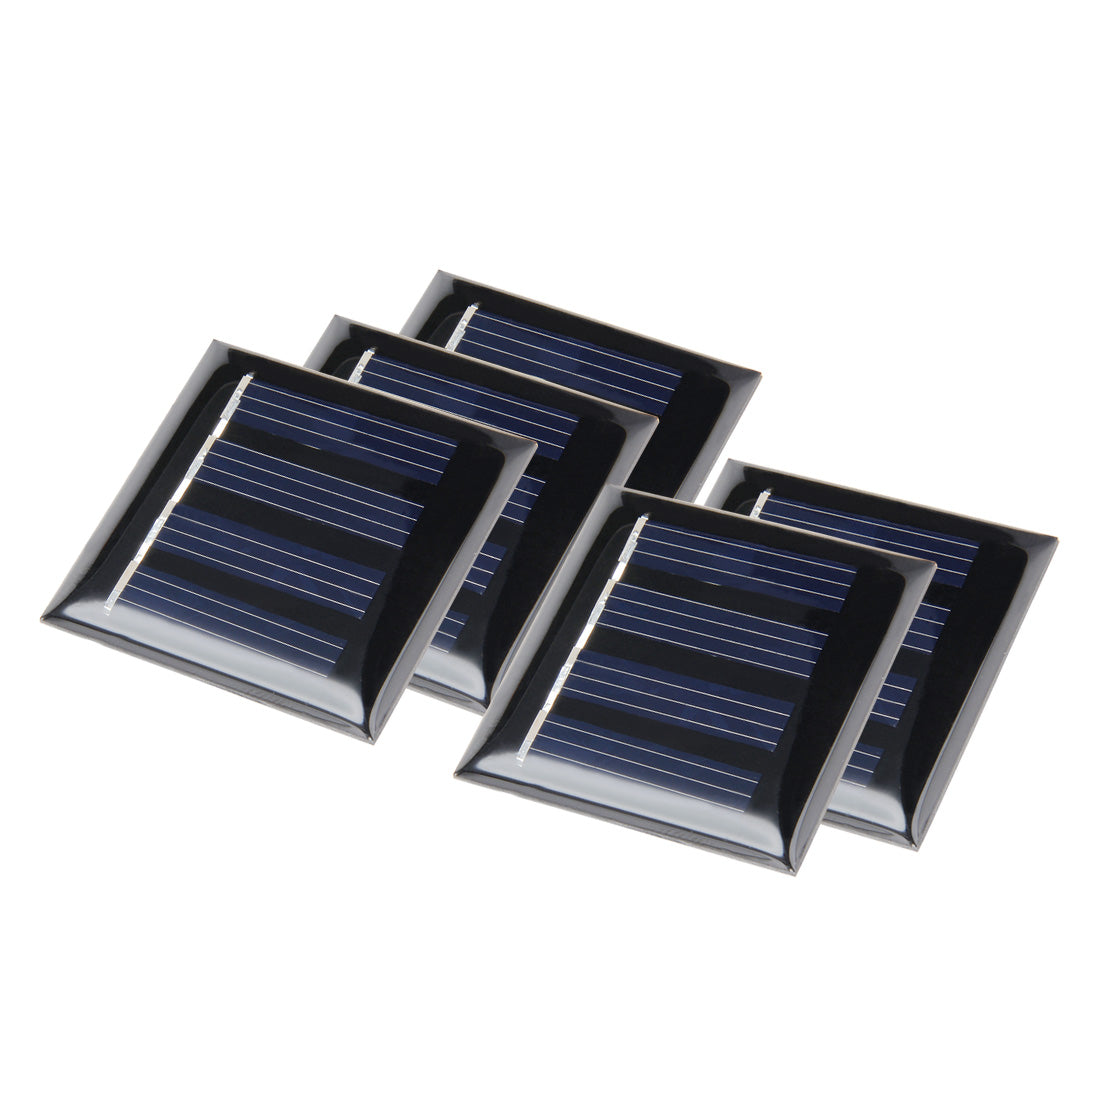 uxcell Uxcell 5Pcs 2V 40mA Poly Mini Solar Cell Panel Module DIY for Light Toys Charger 40mm x 40mm